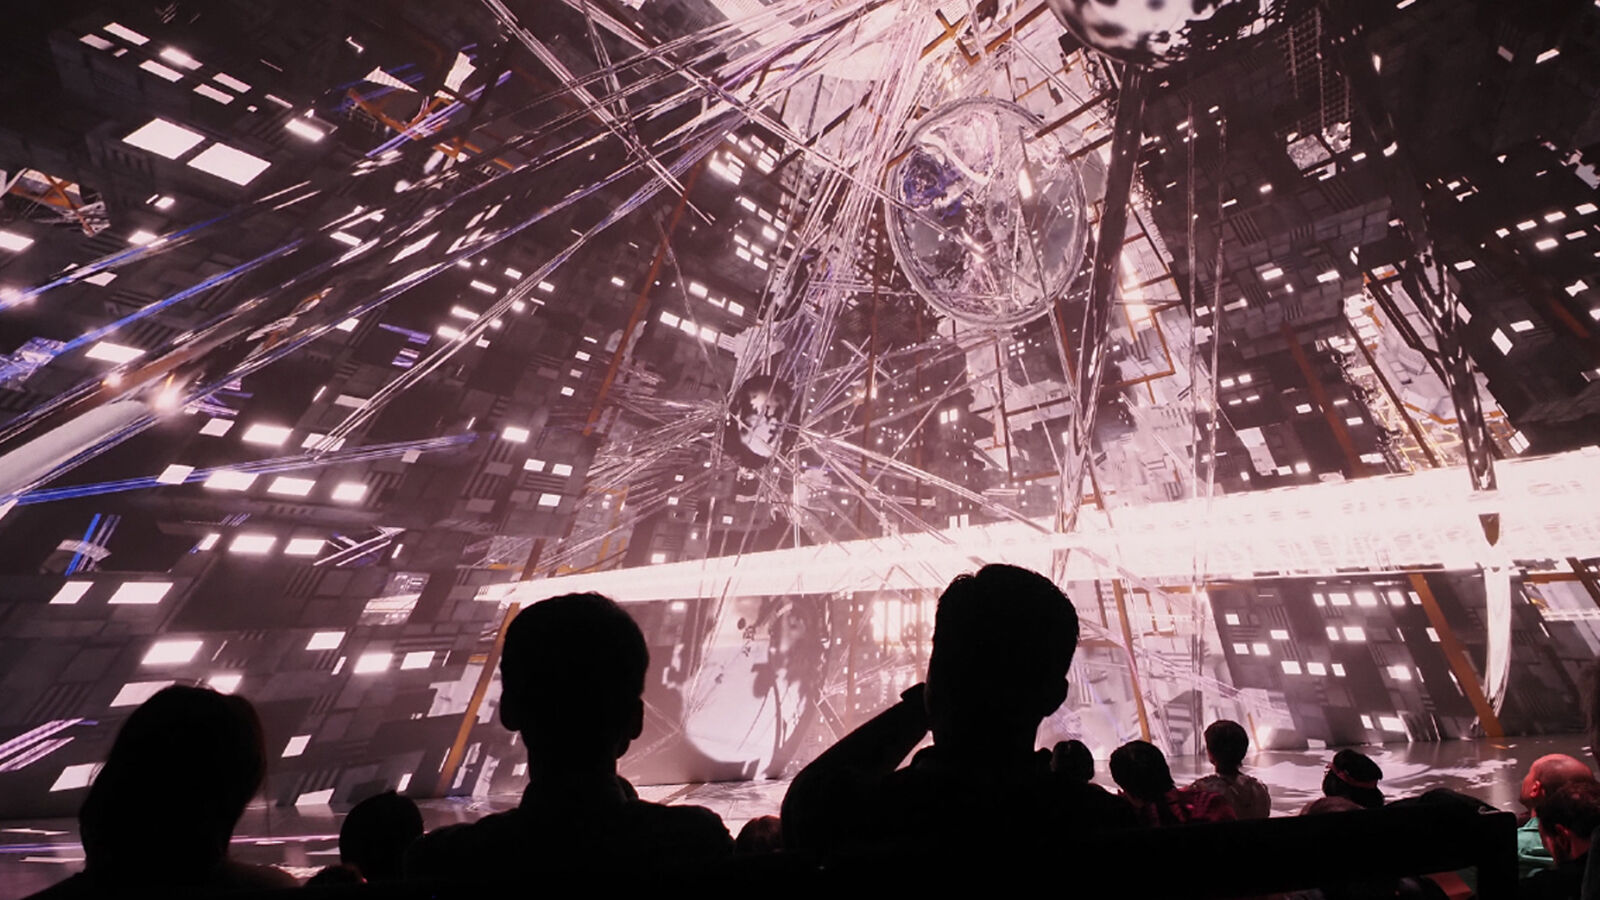 Immersive Screening of the 5th VH AWARD, provided by Ars Electronica